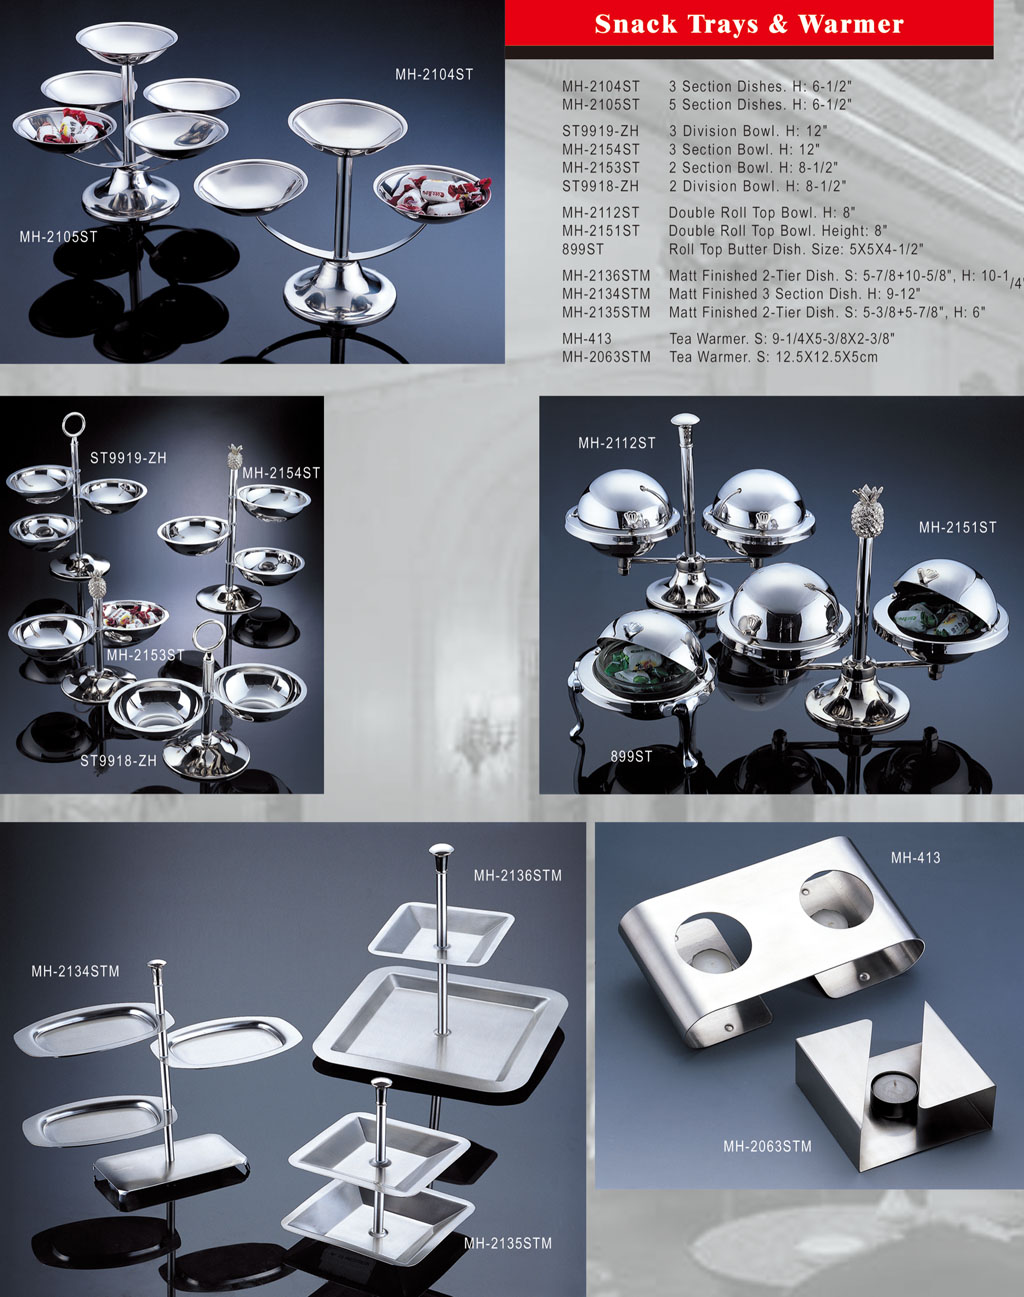 Stainless Steel Ware - Snack Trays & Warmer